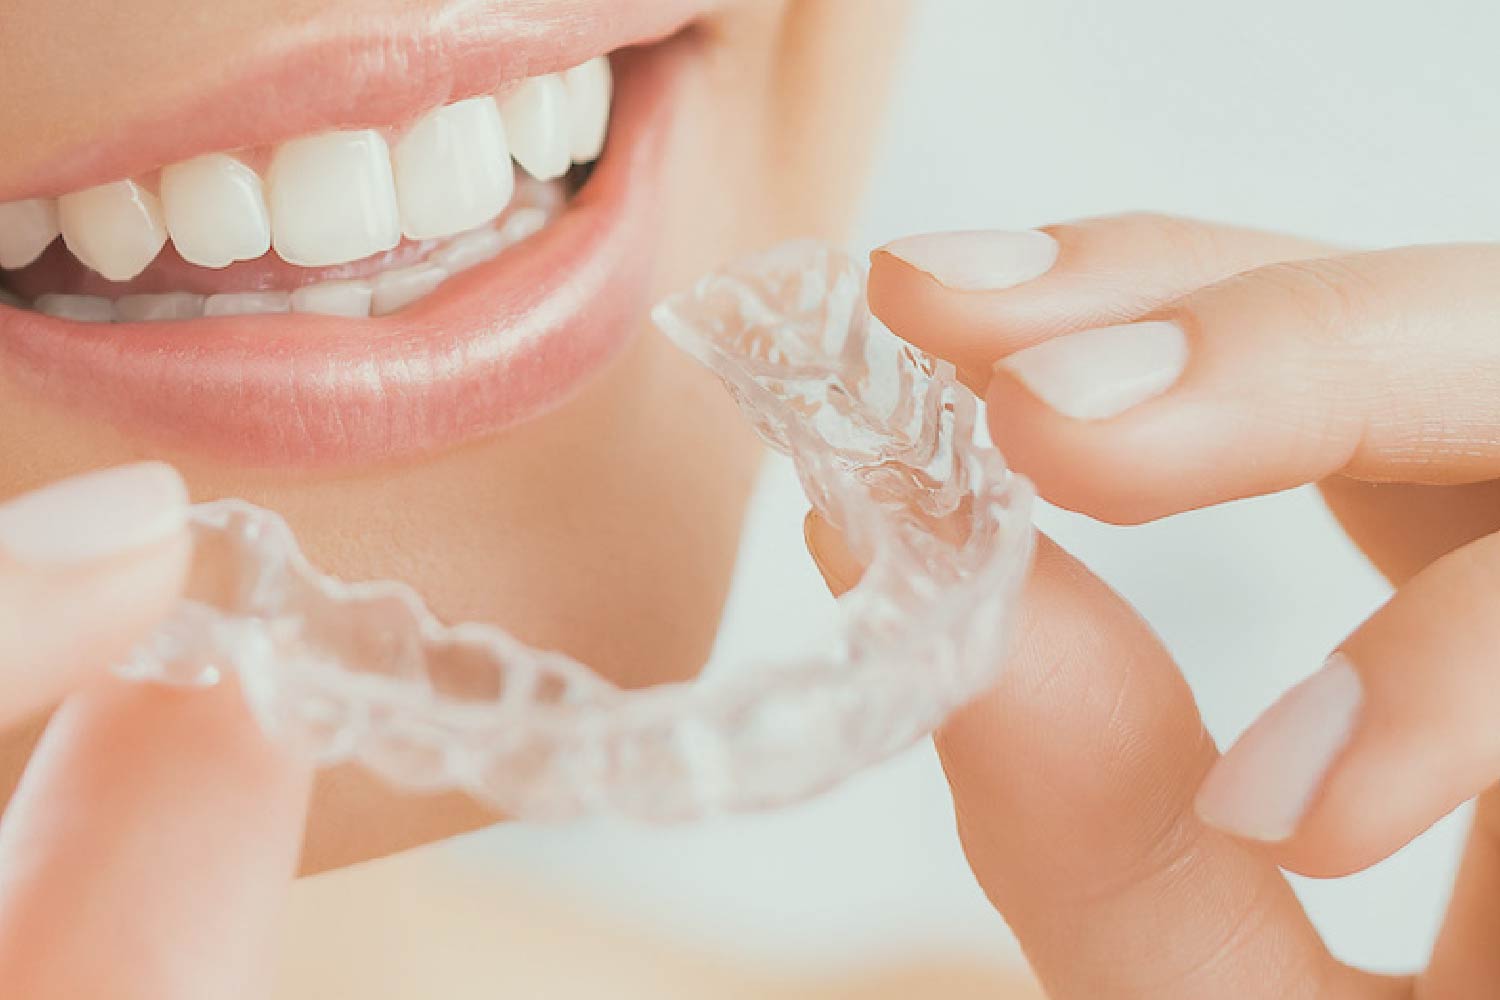 The effects of brief daily vibration on clear aligner orthodontic treatment